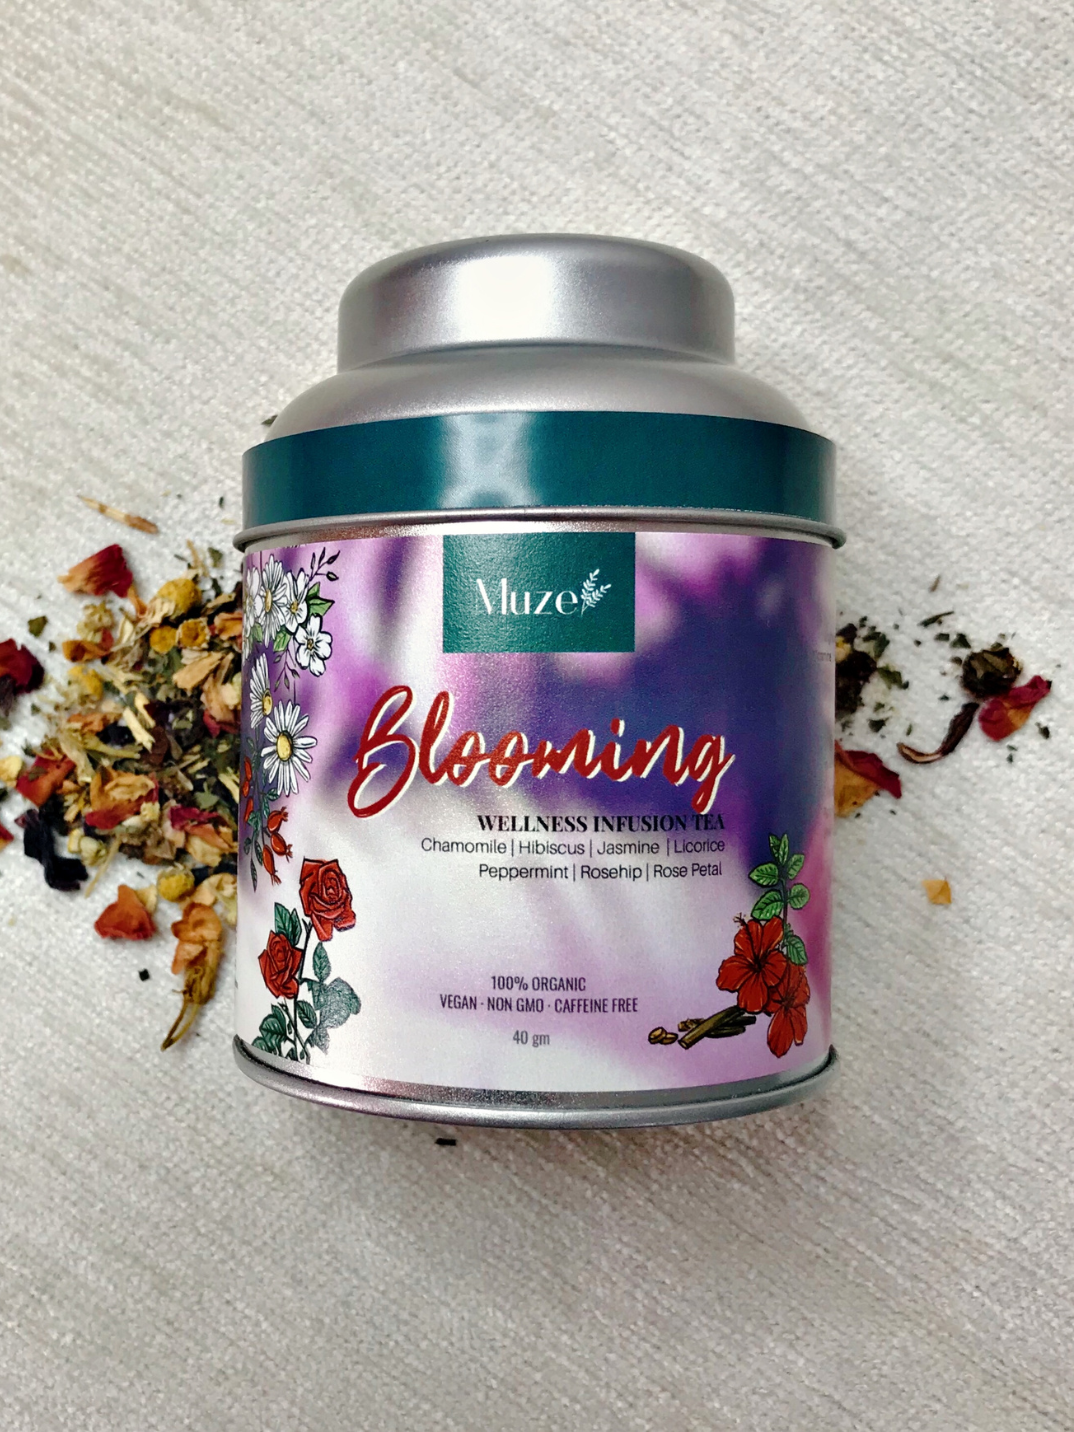 Ayurveda Blooming Herbal Tea wellness infusion tea with chamomile hibiscus jasmine peppermint and rose